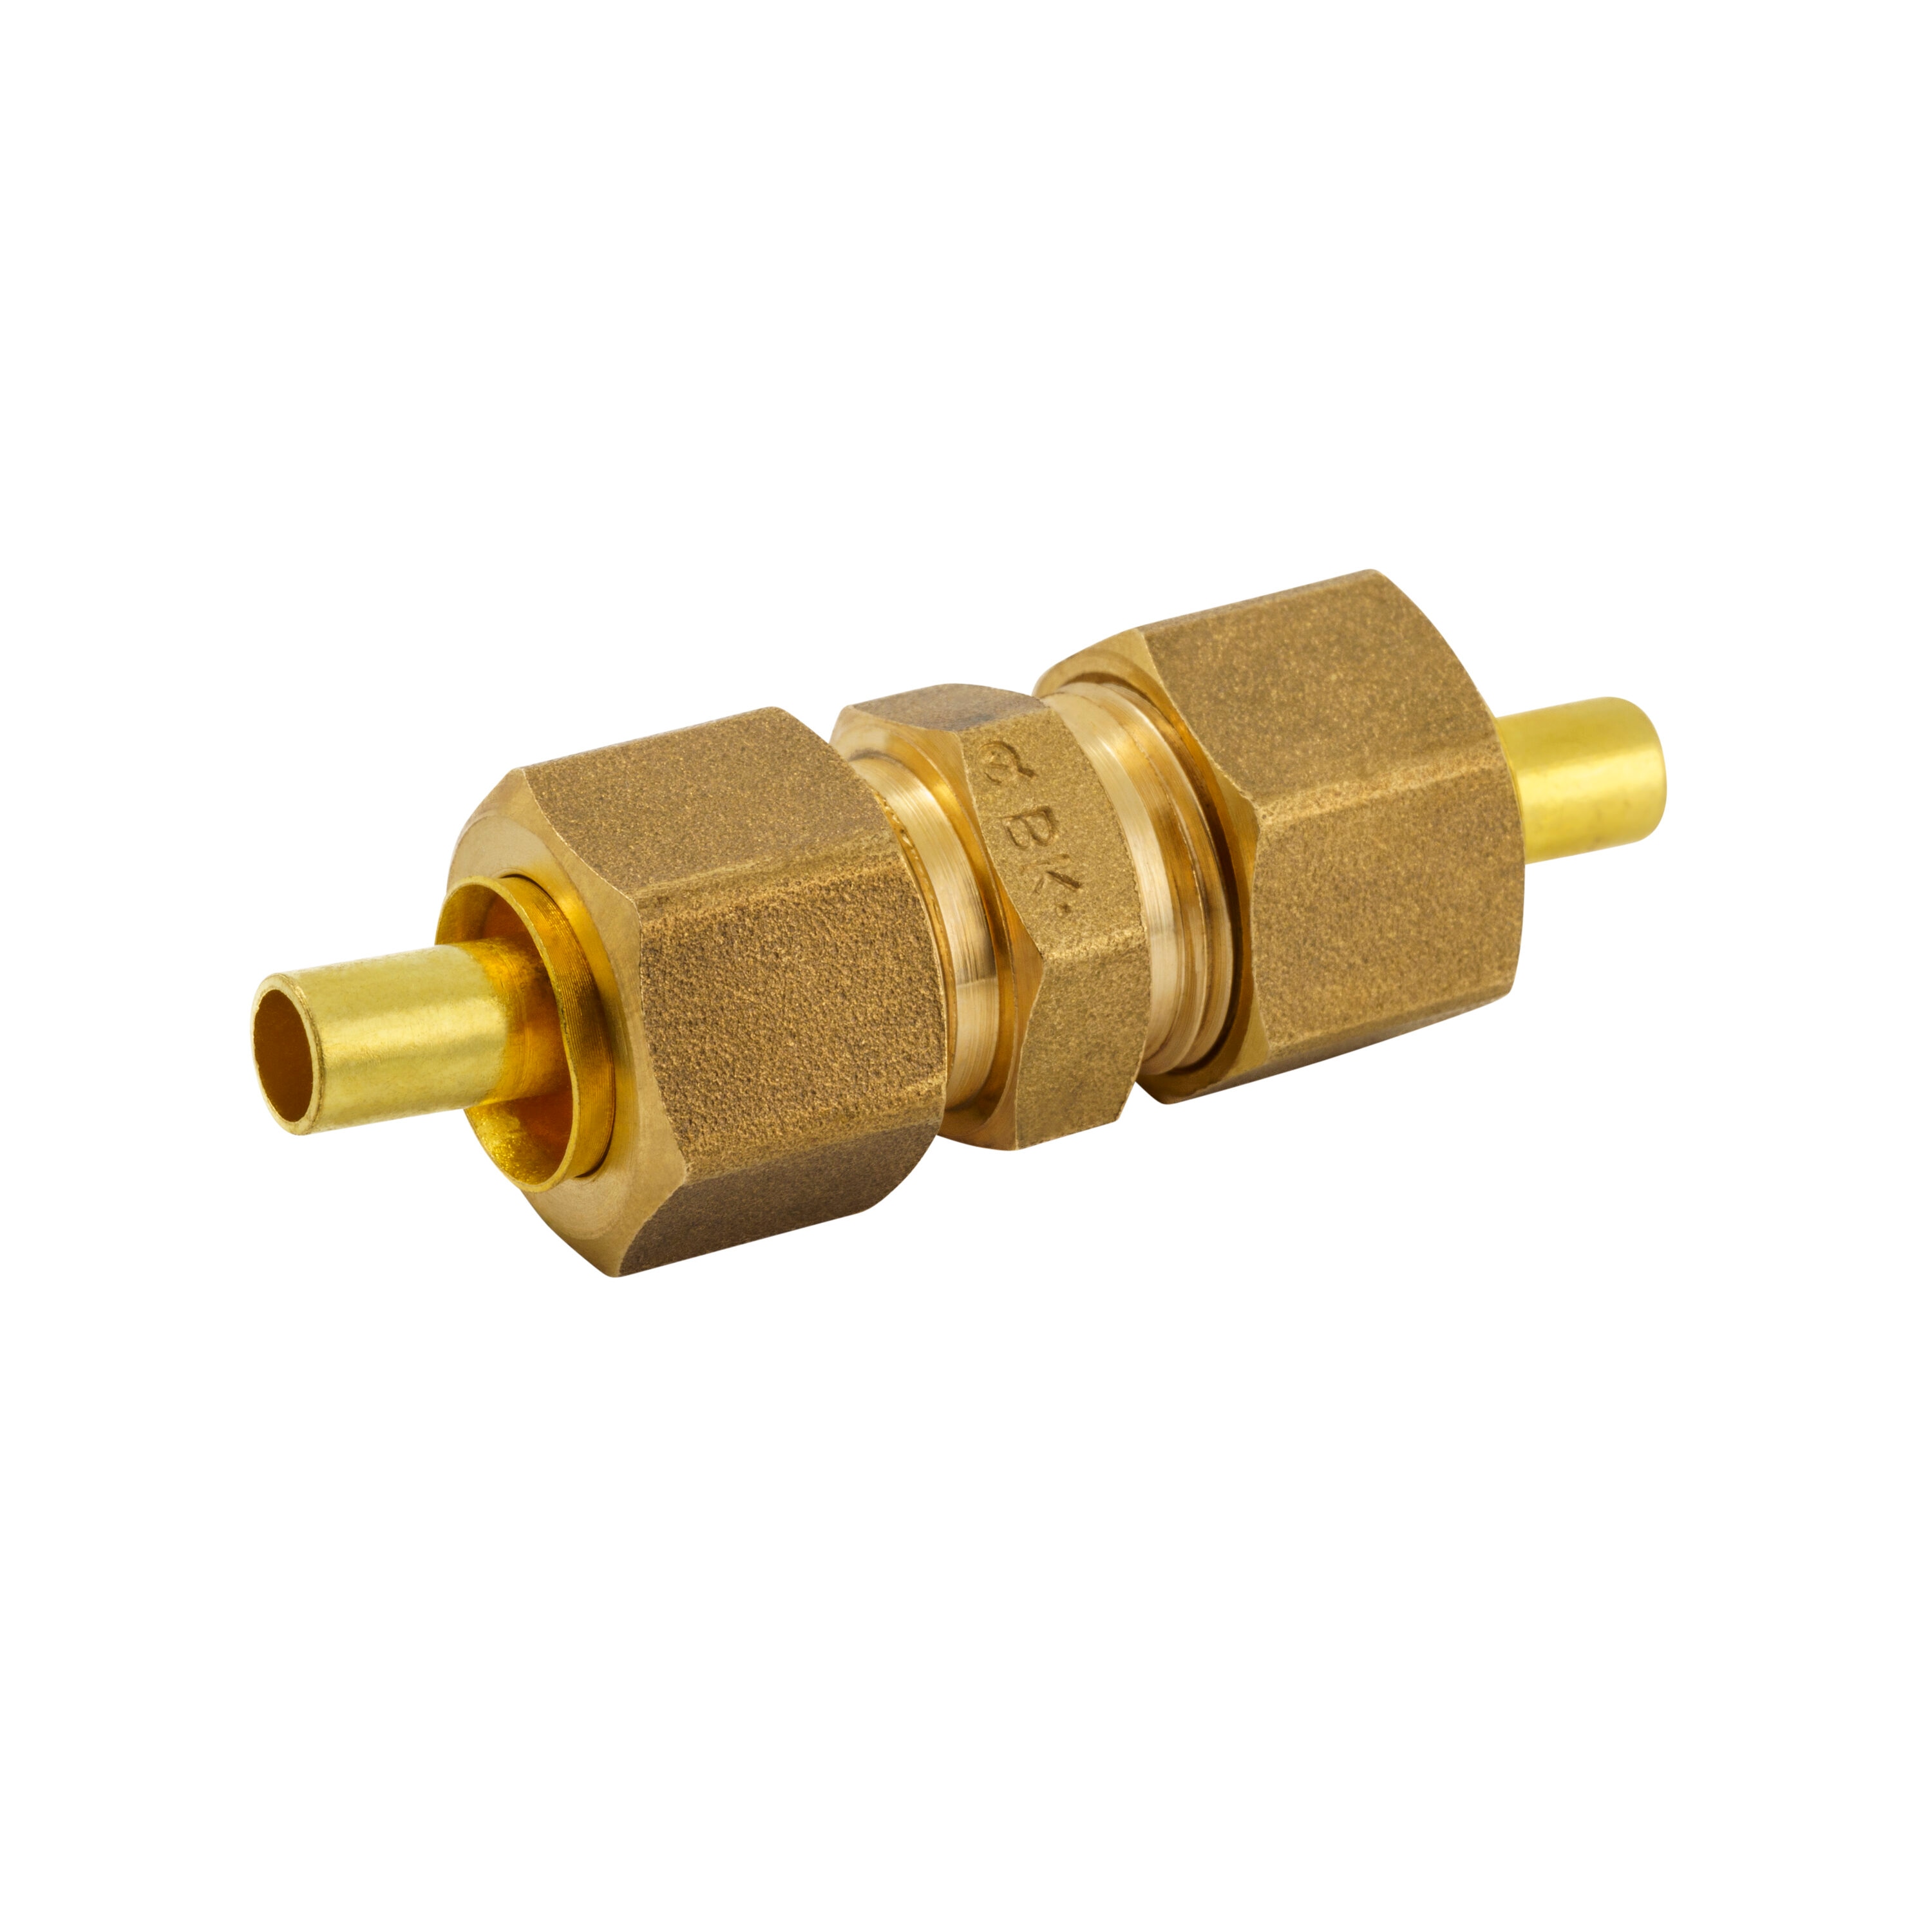 Cambridge Brass - 3/4 Compression Brass Coupling :: Weeks Home Hardware